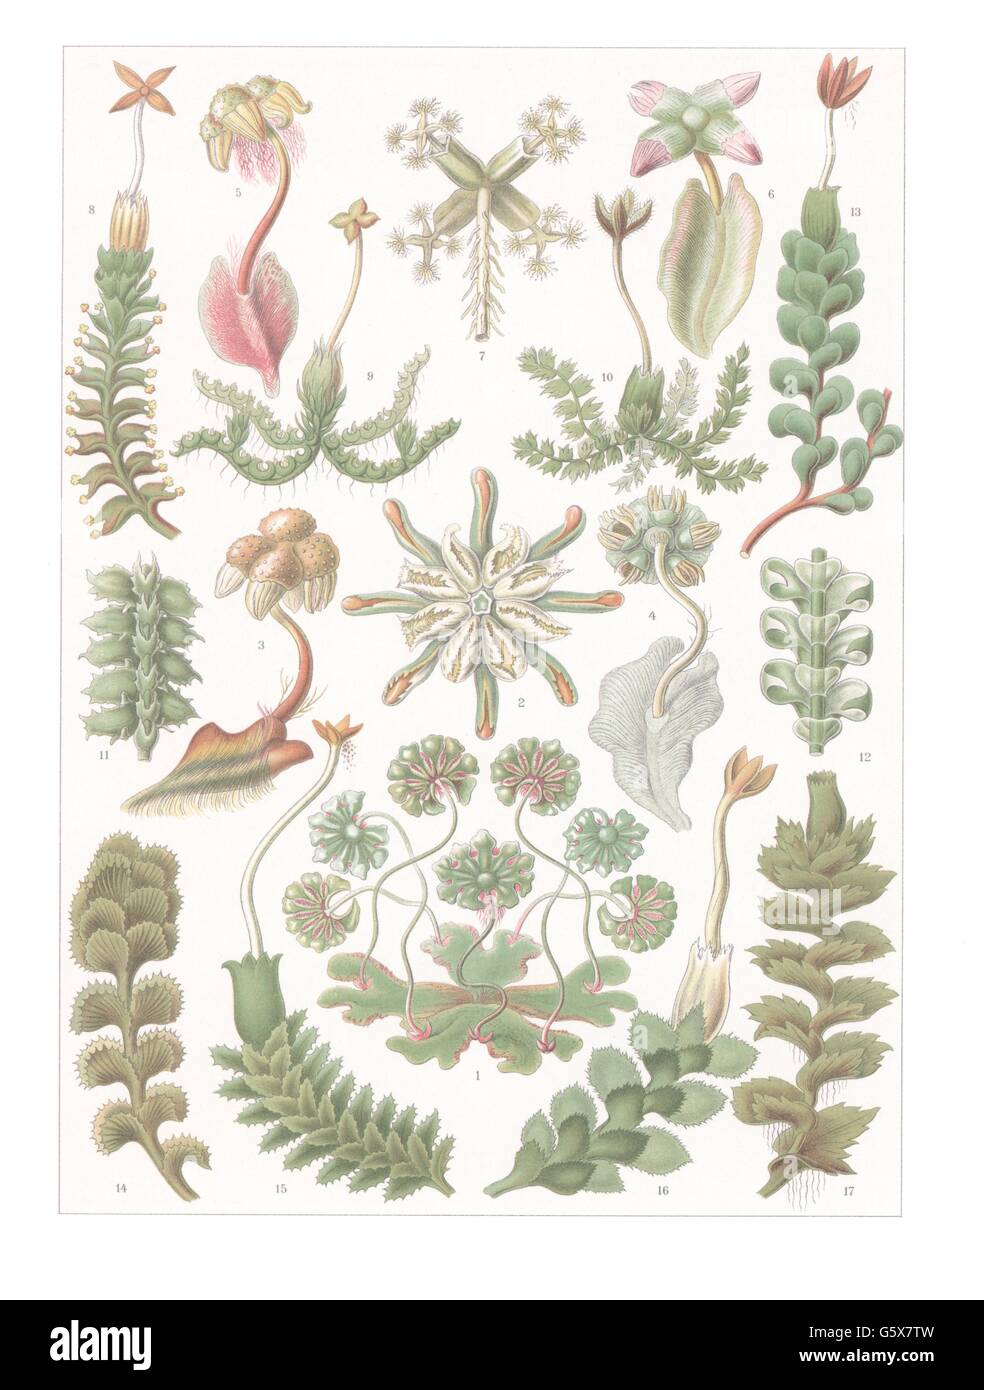 botany, mosses, liverworts (Hepaticae), colour lithograph, out of: Ernst Haeckel, 'Kunstformen der Natur', Leipzig - Vienna, 1899 - 1904, Additional-Rights-Clearences-Not Available Stock Photo